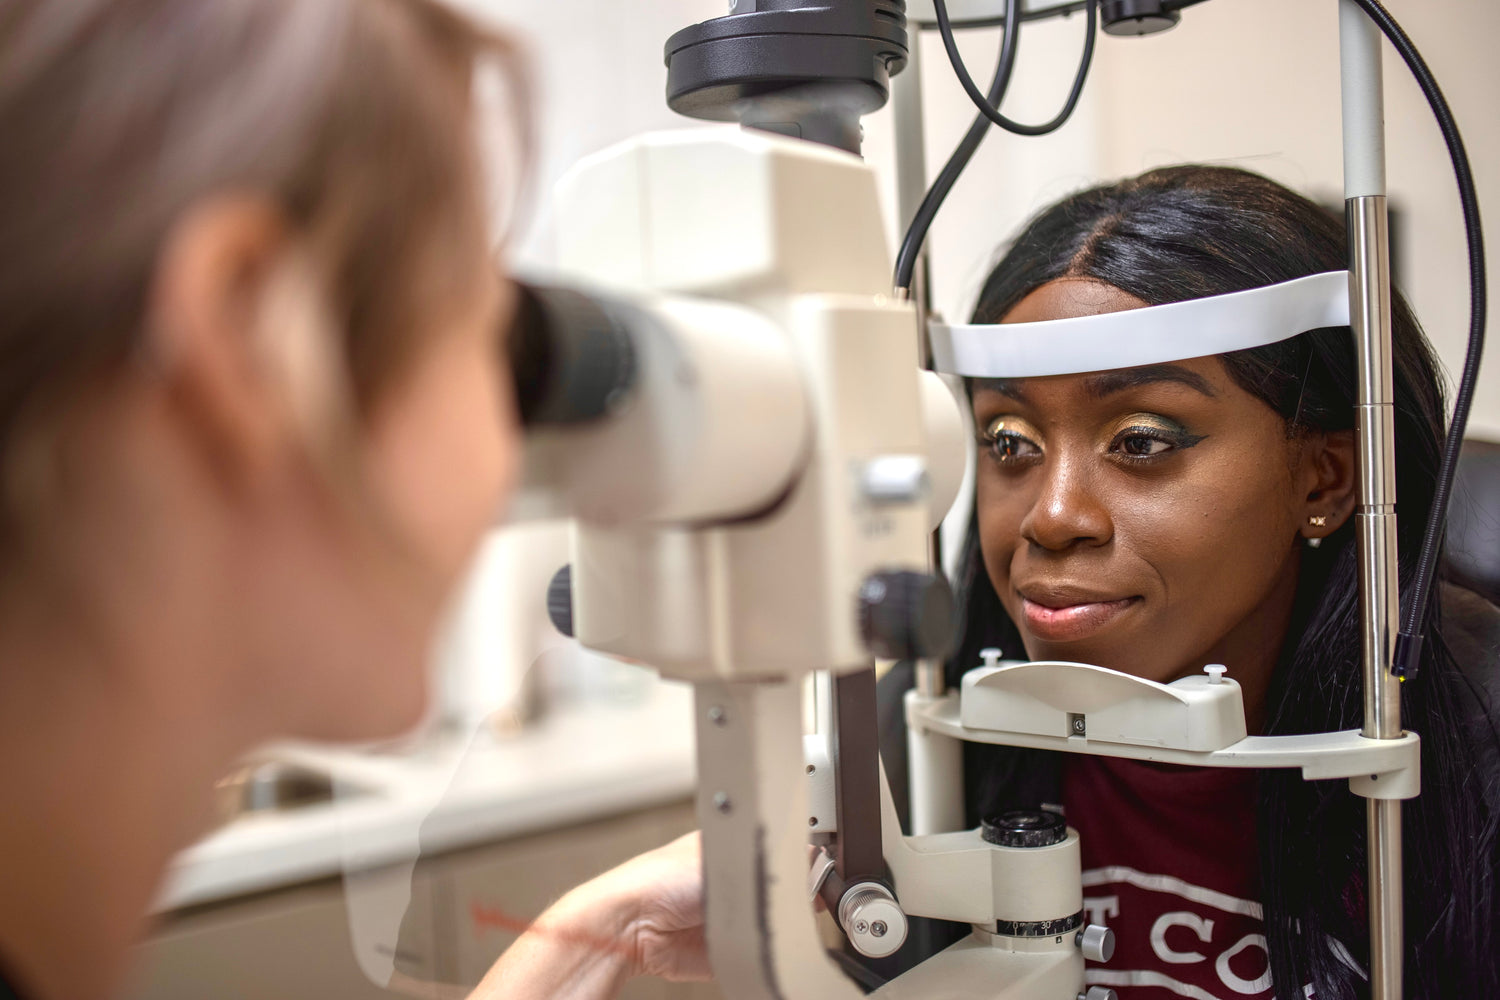 Optometrist looking through microscope towards a patient's eye. Patient is smiling.